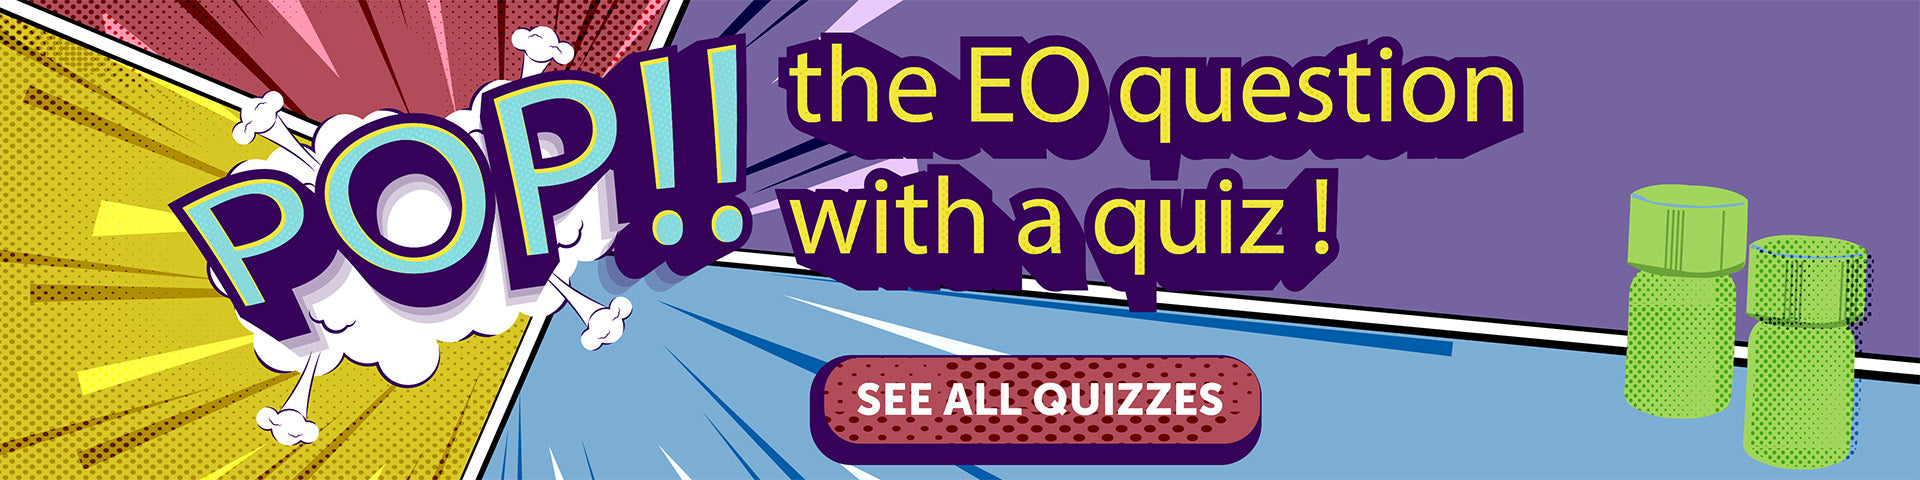 Pop the EO question with a quiz!